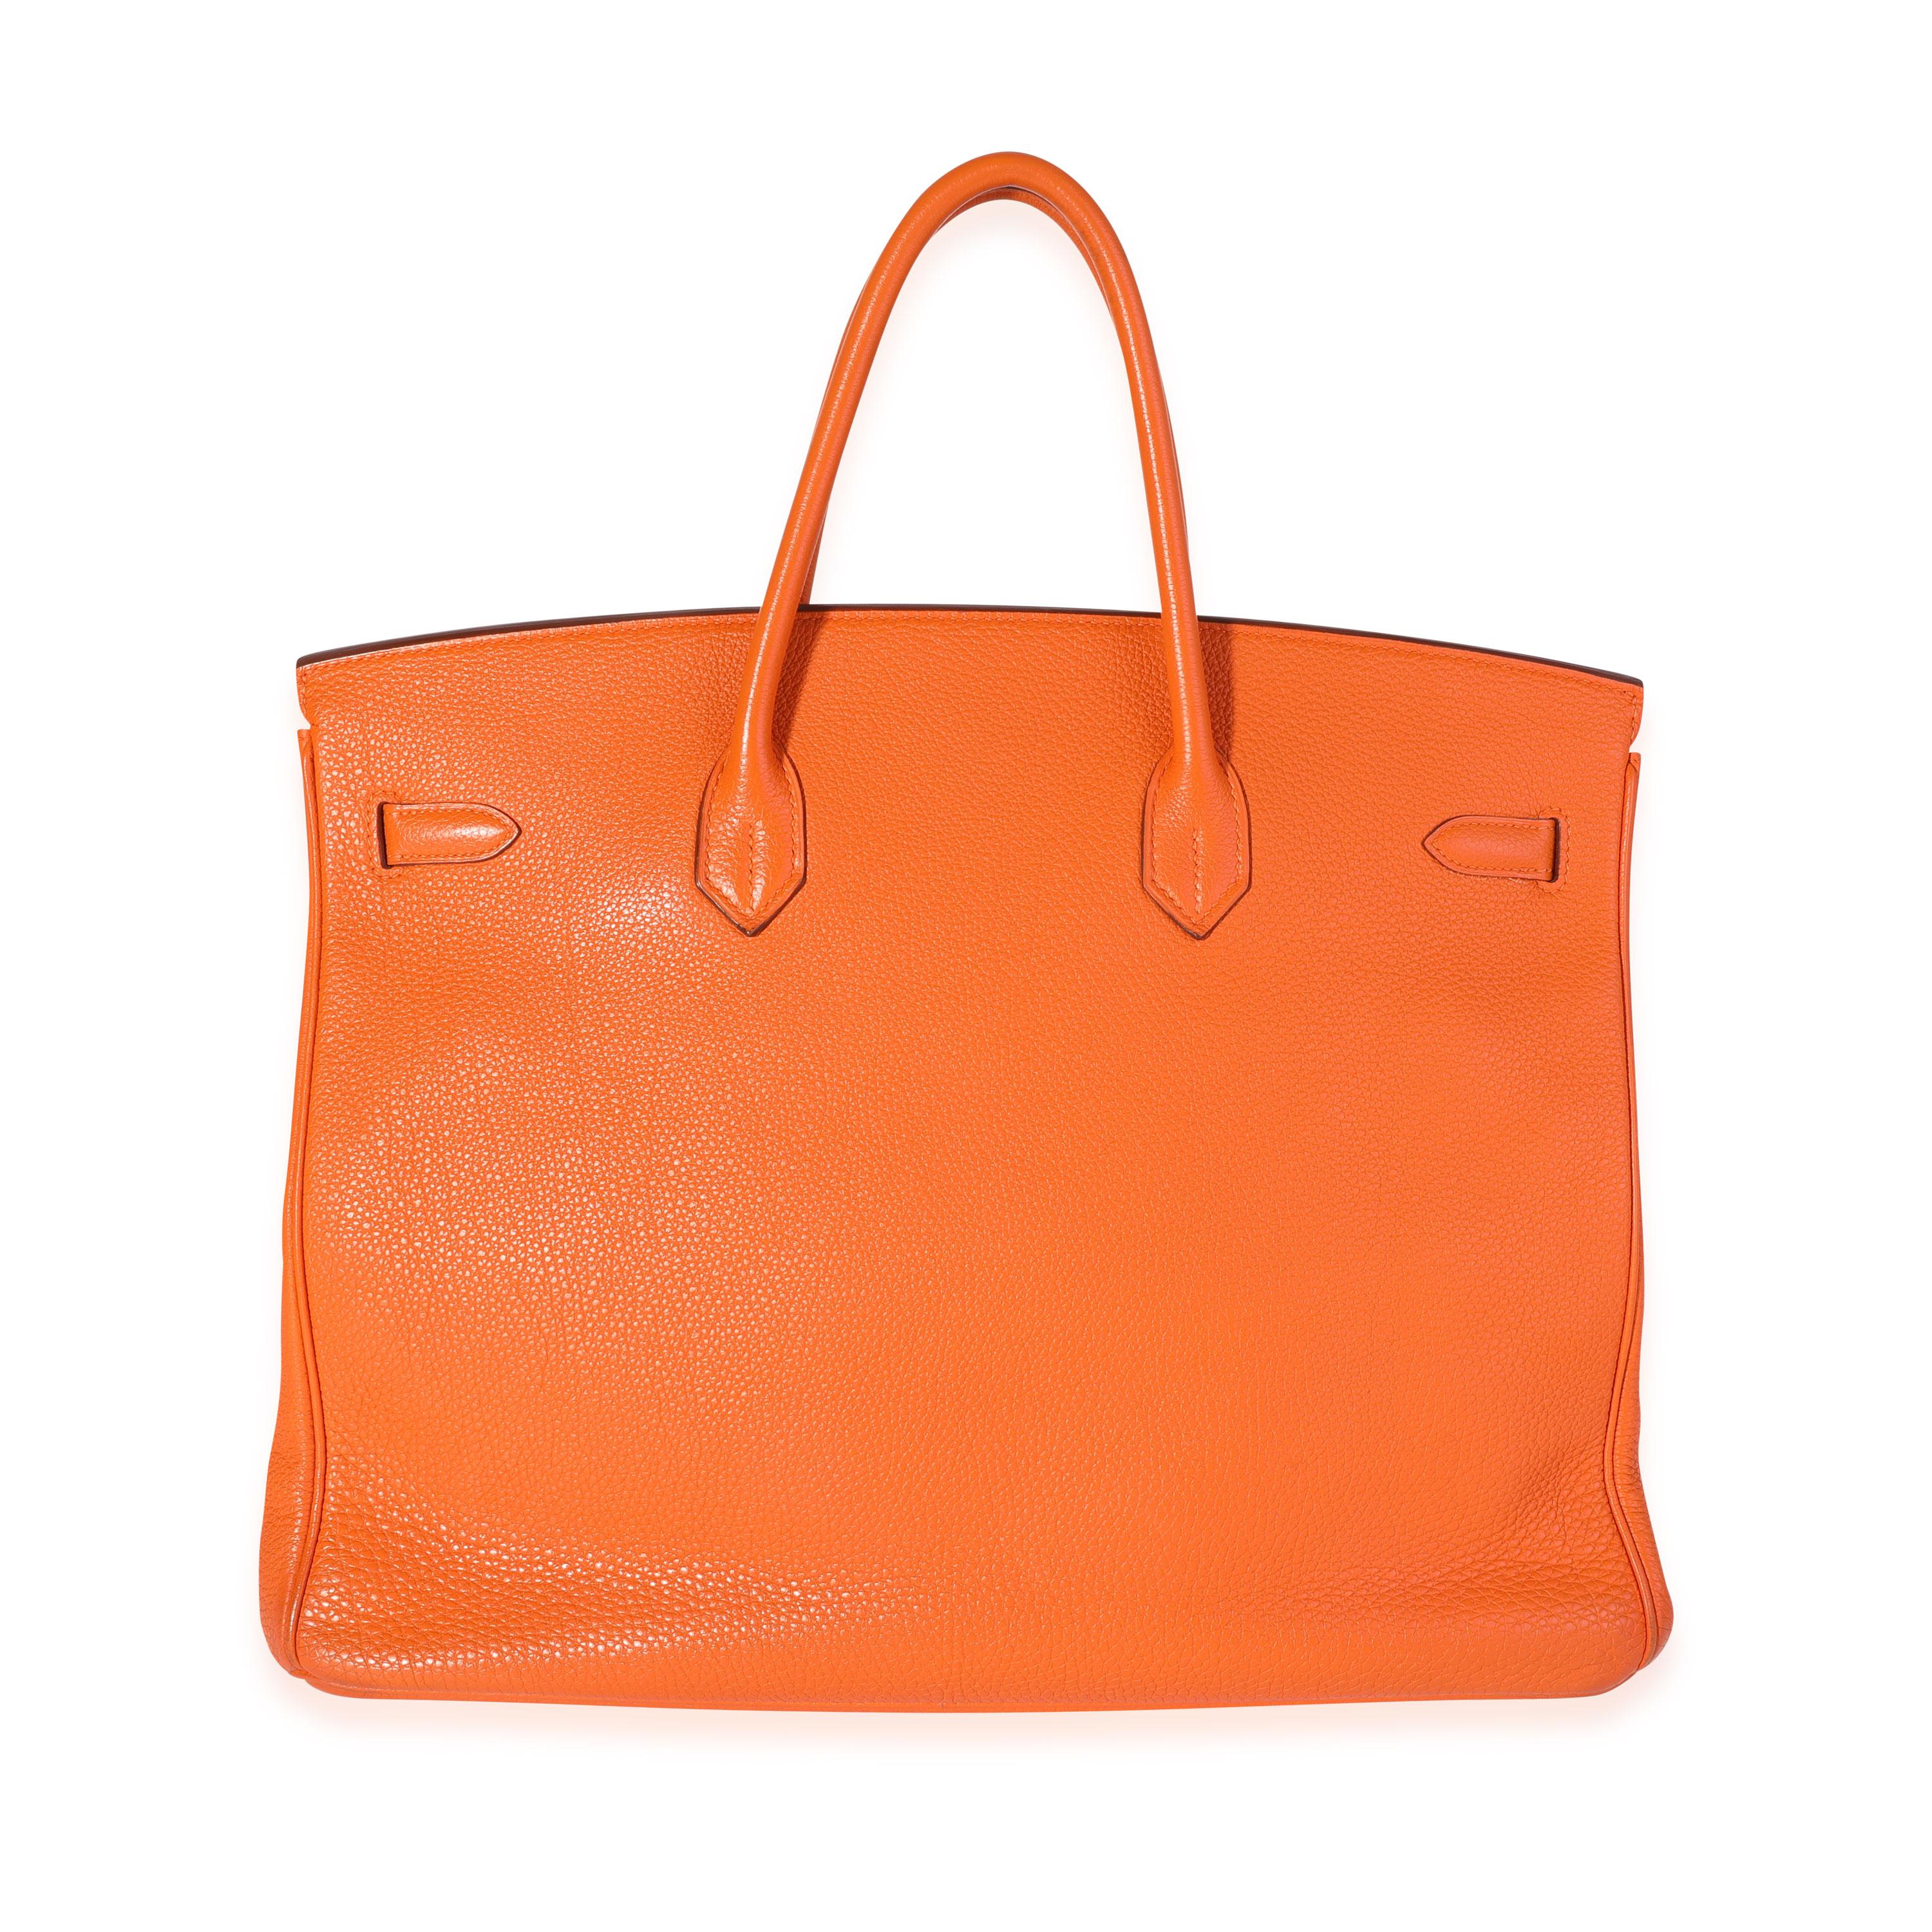 Listing Title: Hermès Orange Togo Birkin 40 PHW
SKU: 119361
Condition: Pre-owned (3000)
Handbag Condition: Very Good
Condition Comments: Very Good Condition. Scuffing to corners and lightly to exterior. Discoloration throughout leather and handles.